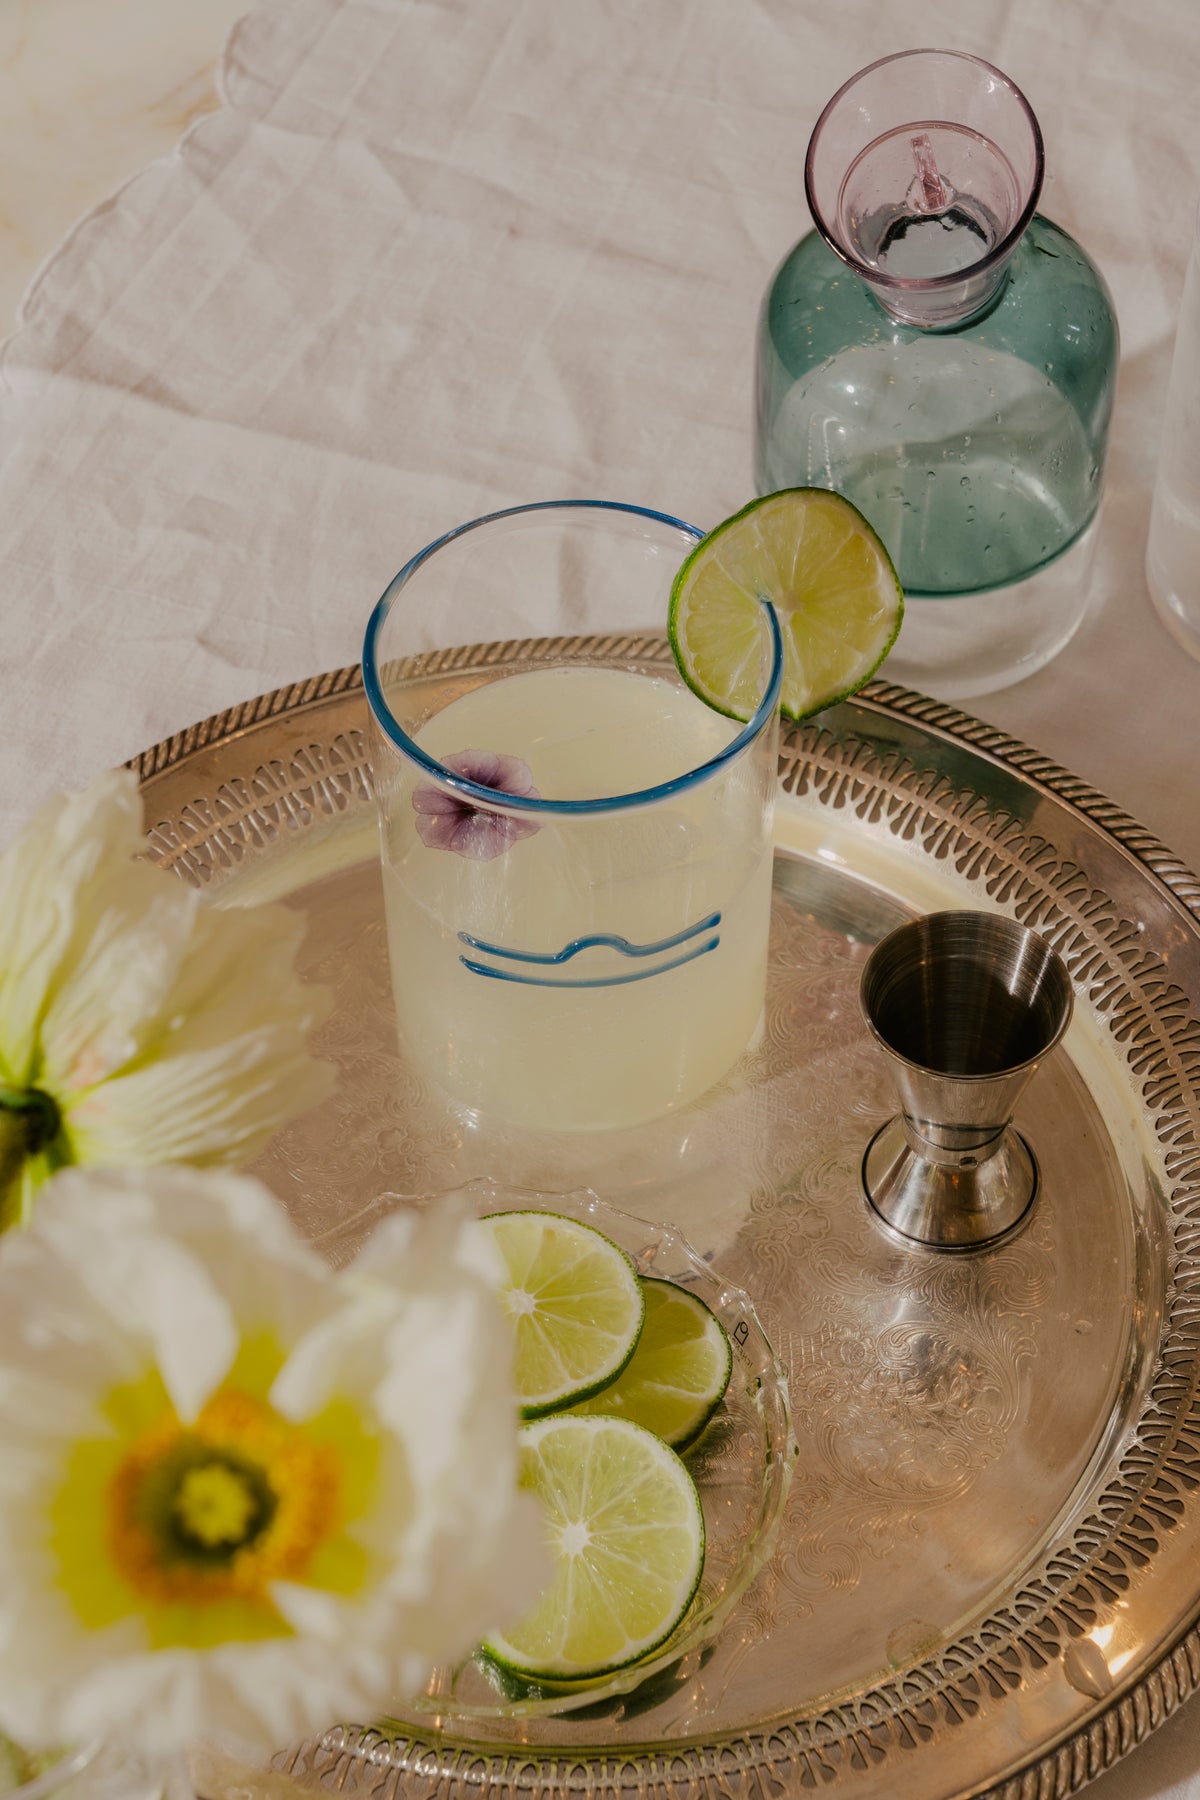 A sophisticated cocktail setup on an silver tray. A clear rocks glass with a blue rim and a libra zodiac sign has a skinny margarita, garnished with a lime wheel and a delicate purple flower floating on top. A small jigger stands to the right of the glass, ready for measuring spirits. To the left, a small dish holds several fresh lime wedges, suggesting the preparation of more drinks. Behind the main glass, a green glass bottle with a pink rim adds a contrasting color to the scene.